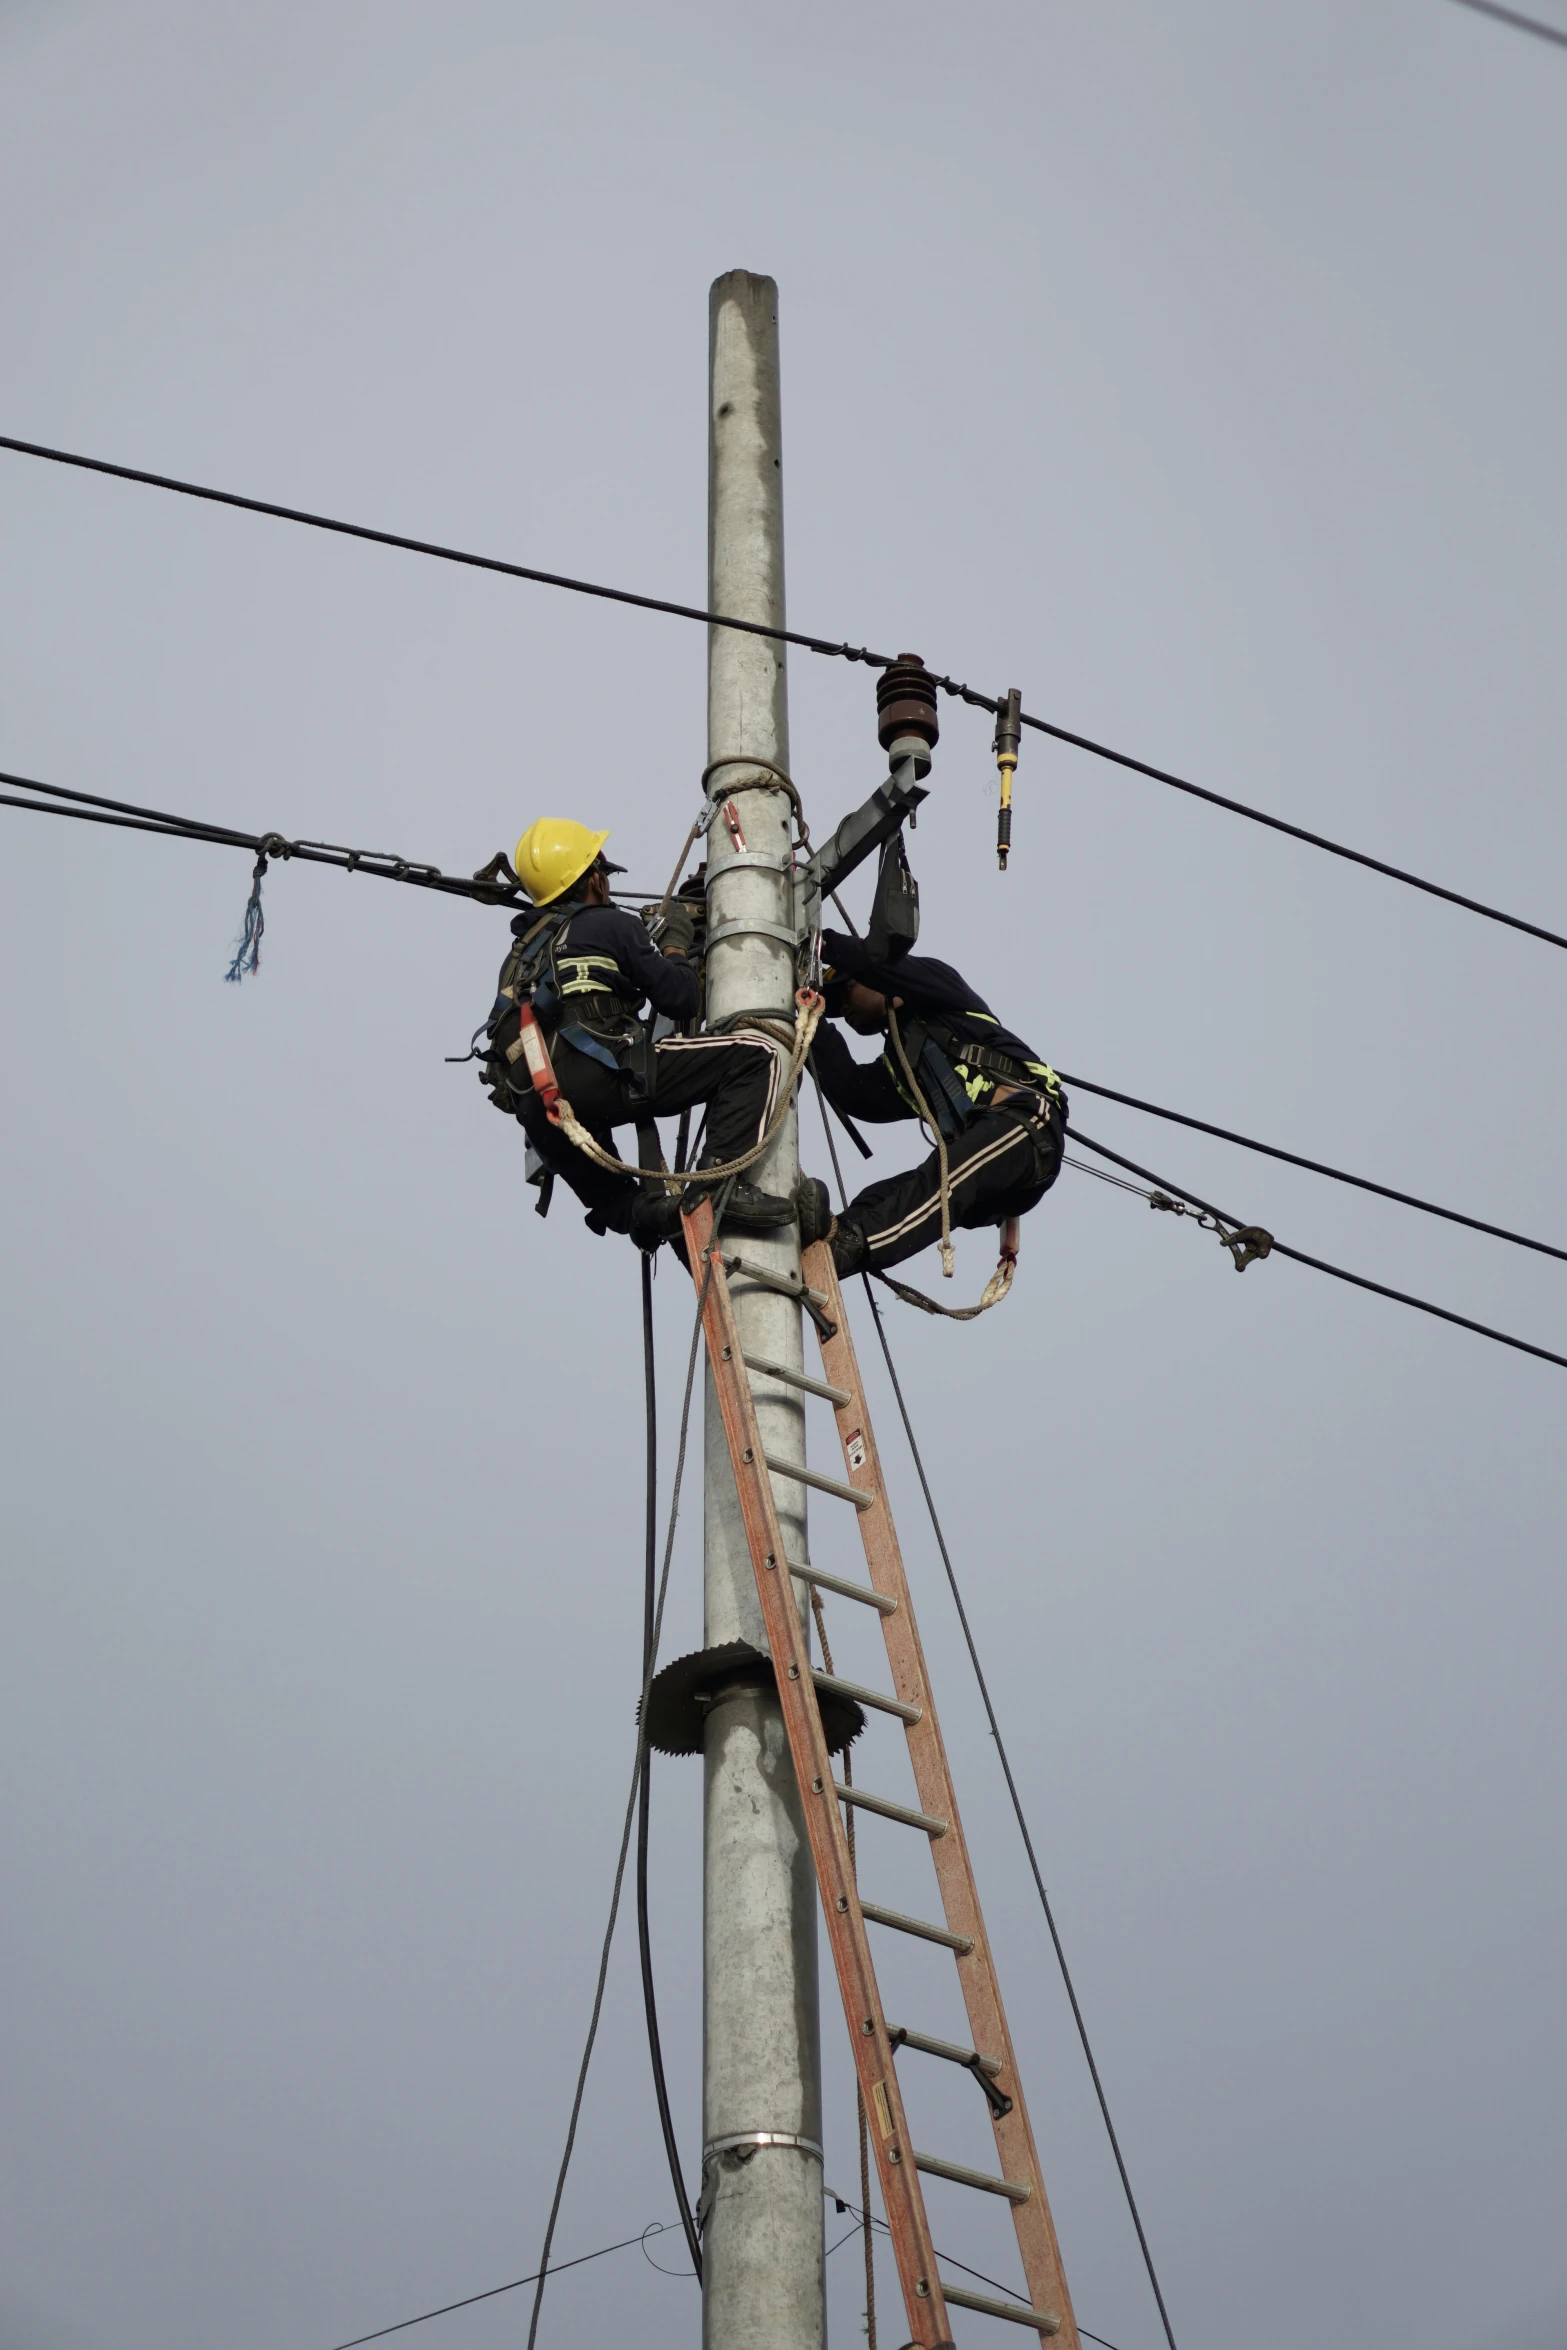 two people on ladders repair electrical wires on pole